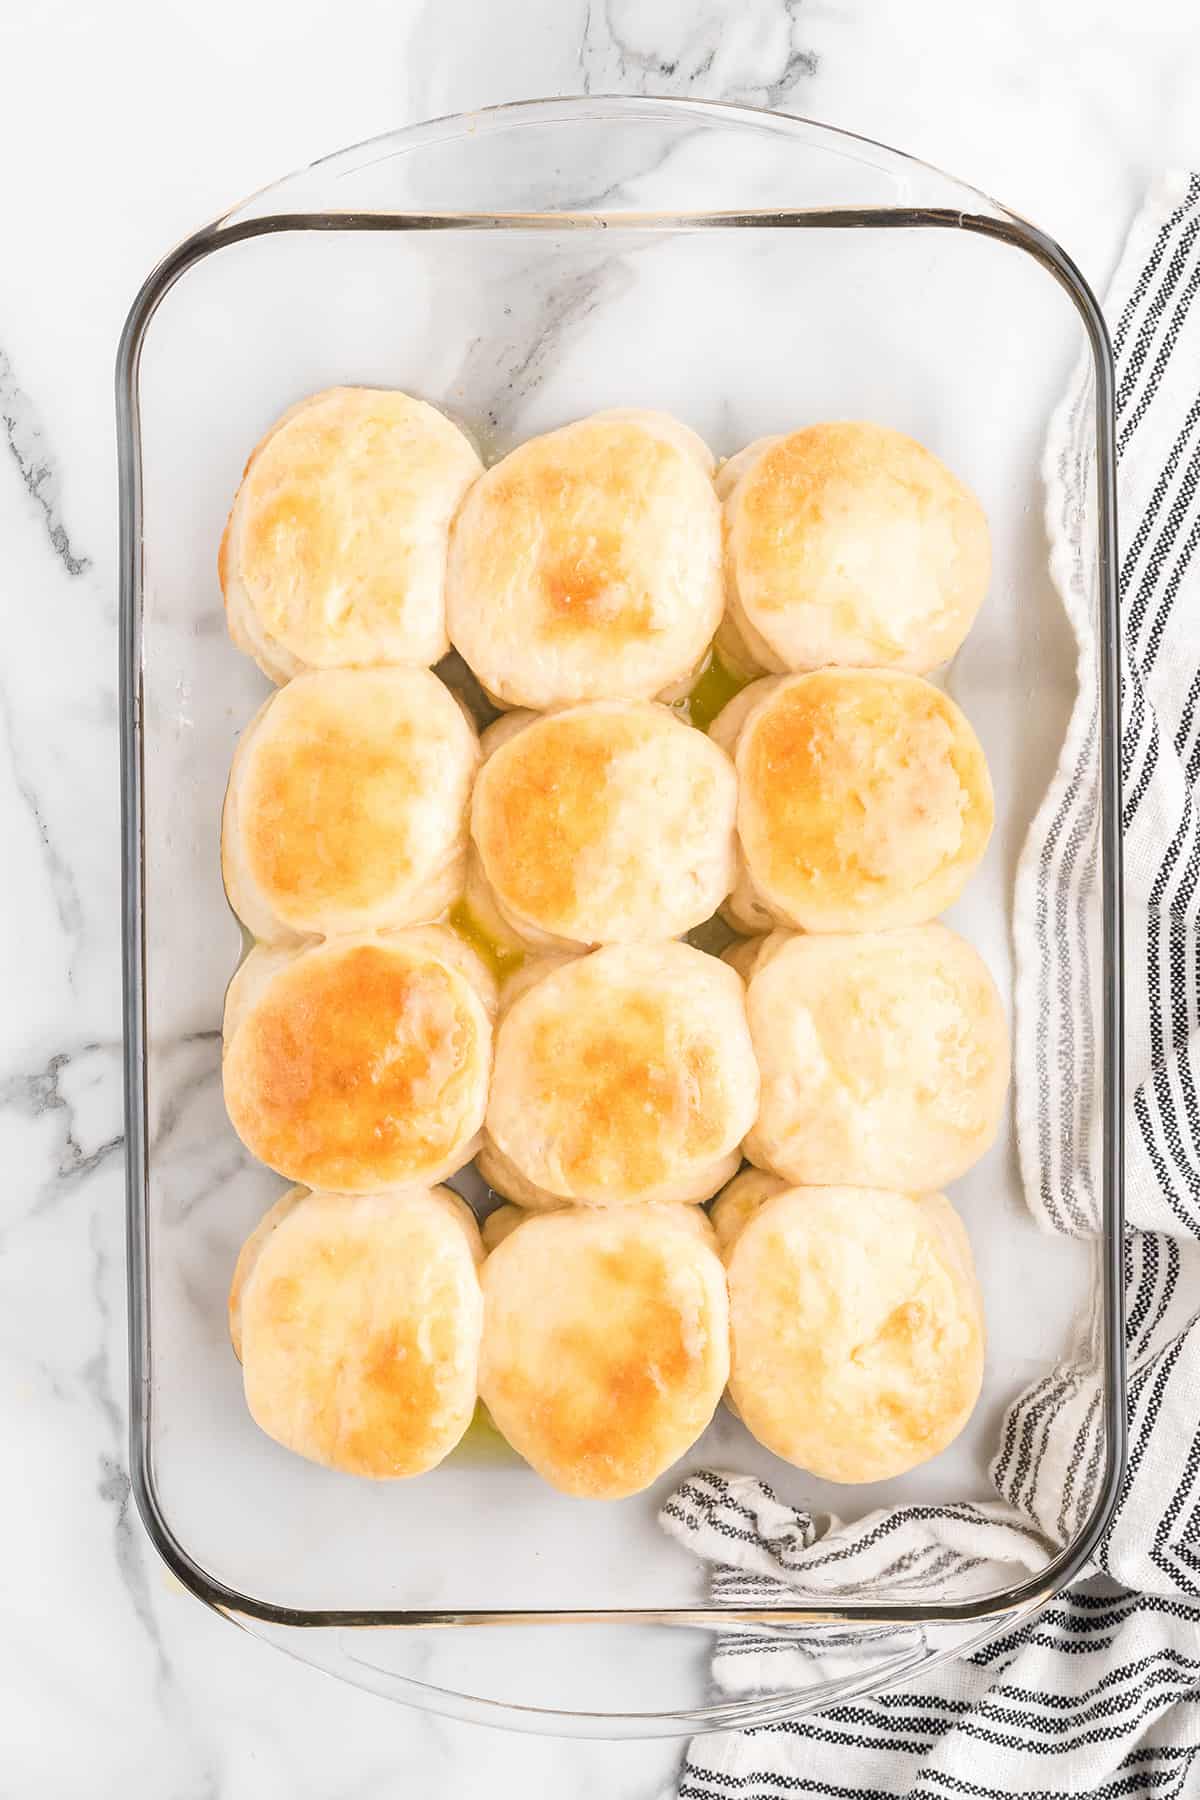 Cooked biscuits in the baking dish.